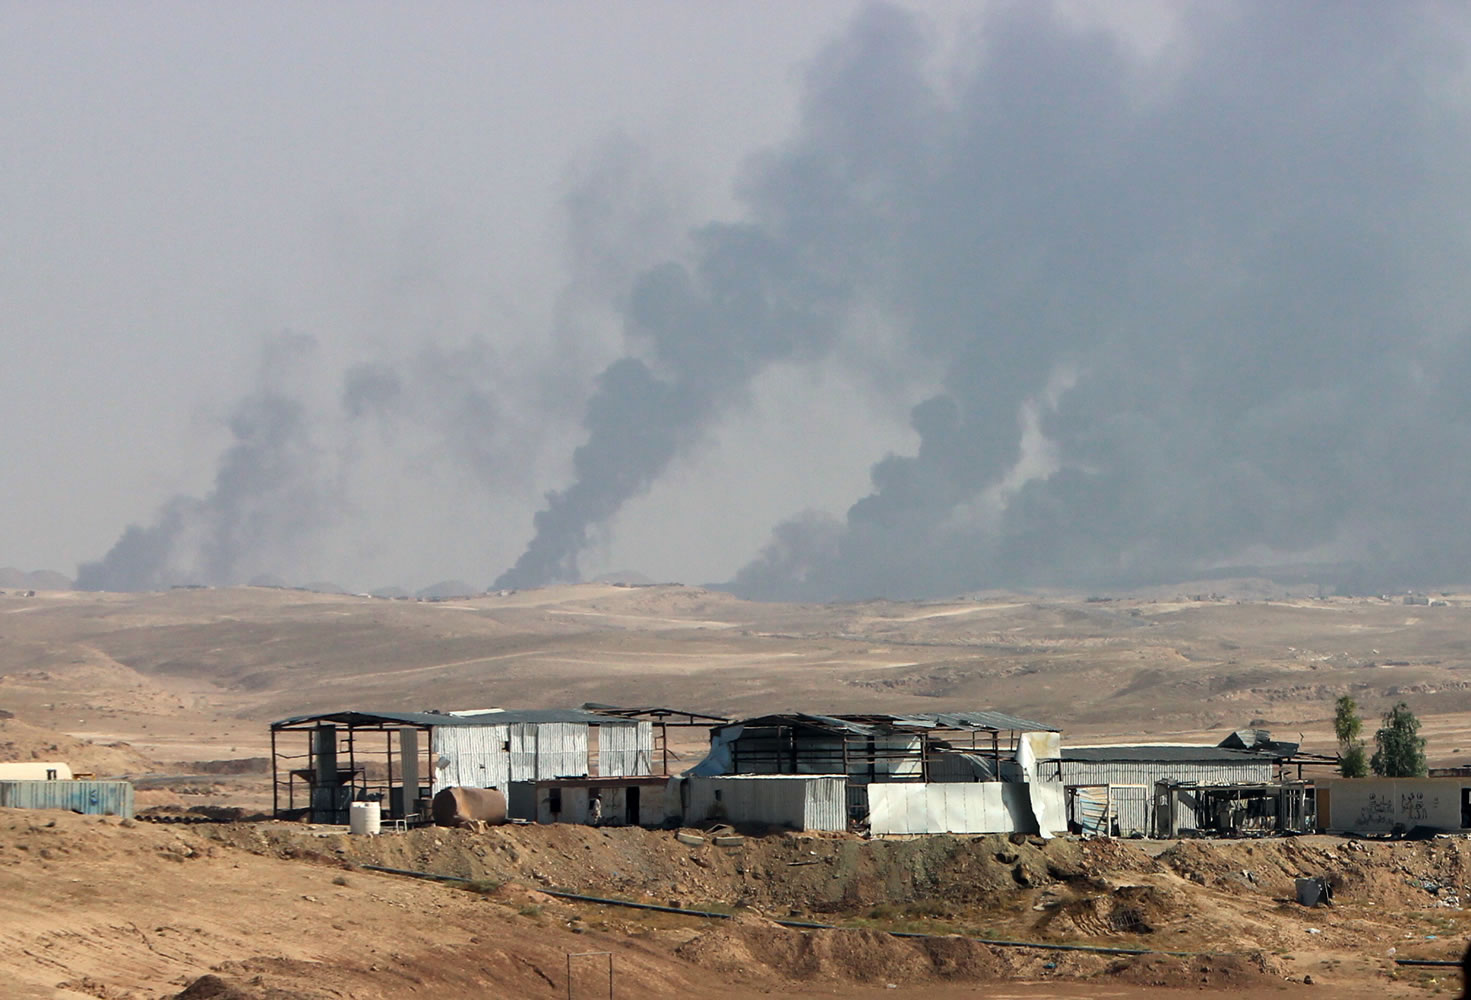 FILE - In this Saturday, Oct. 24, 2015, file photo, smoke rises as Iraqi security forces and allied Popular Mobilization Forces shell Islamic State group positions at an oil field outside Beiji, some 250 kilometers (155 miles) north of Baghdad, Iraq. The United States and Russia are going after the Islamic State group?s oil industry, destroying refineries and hundreds of tanker trucks transporting oil from eastern Syria in a heavy bombardment in recent days aiming to break the extremists? biggest source of income.